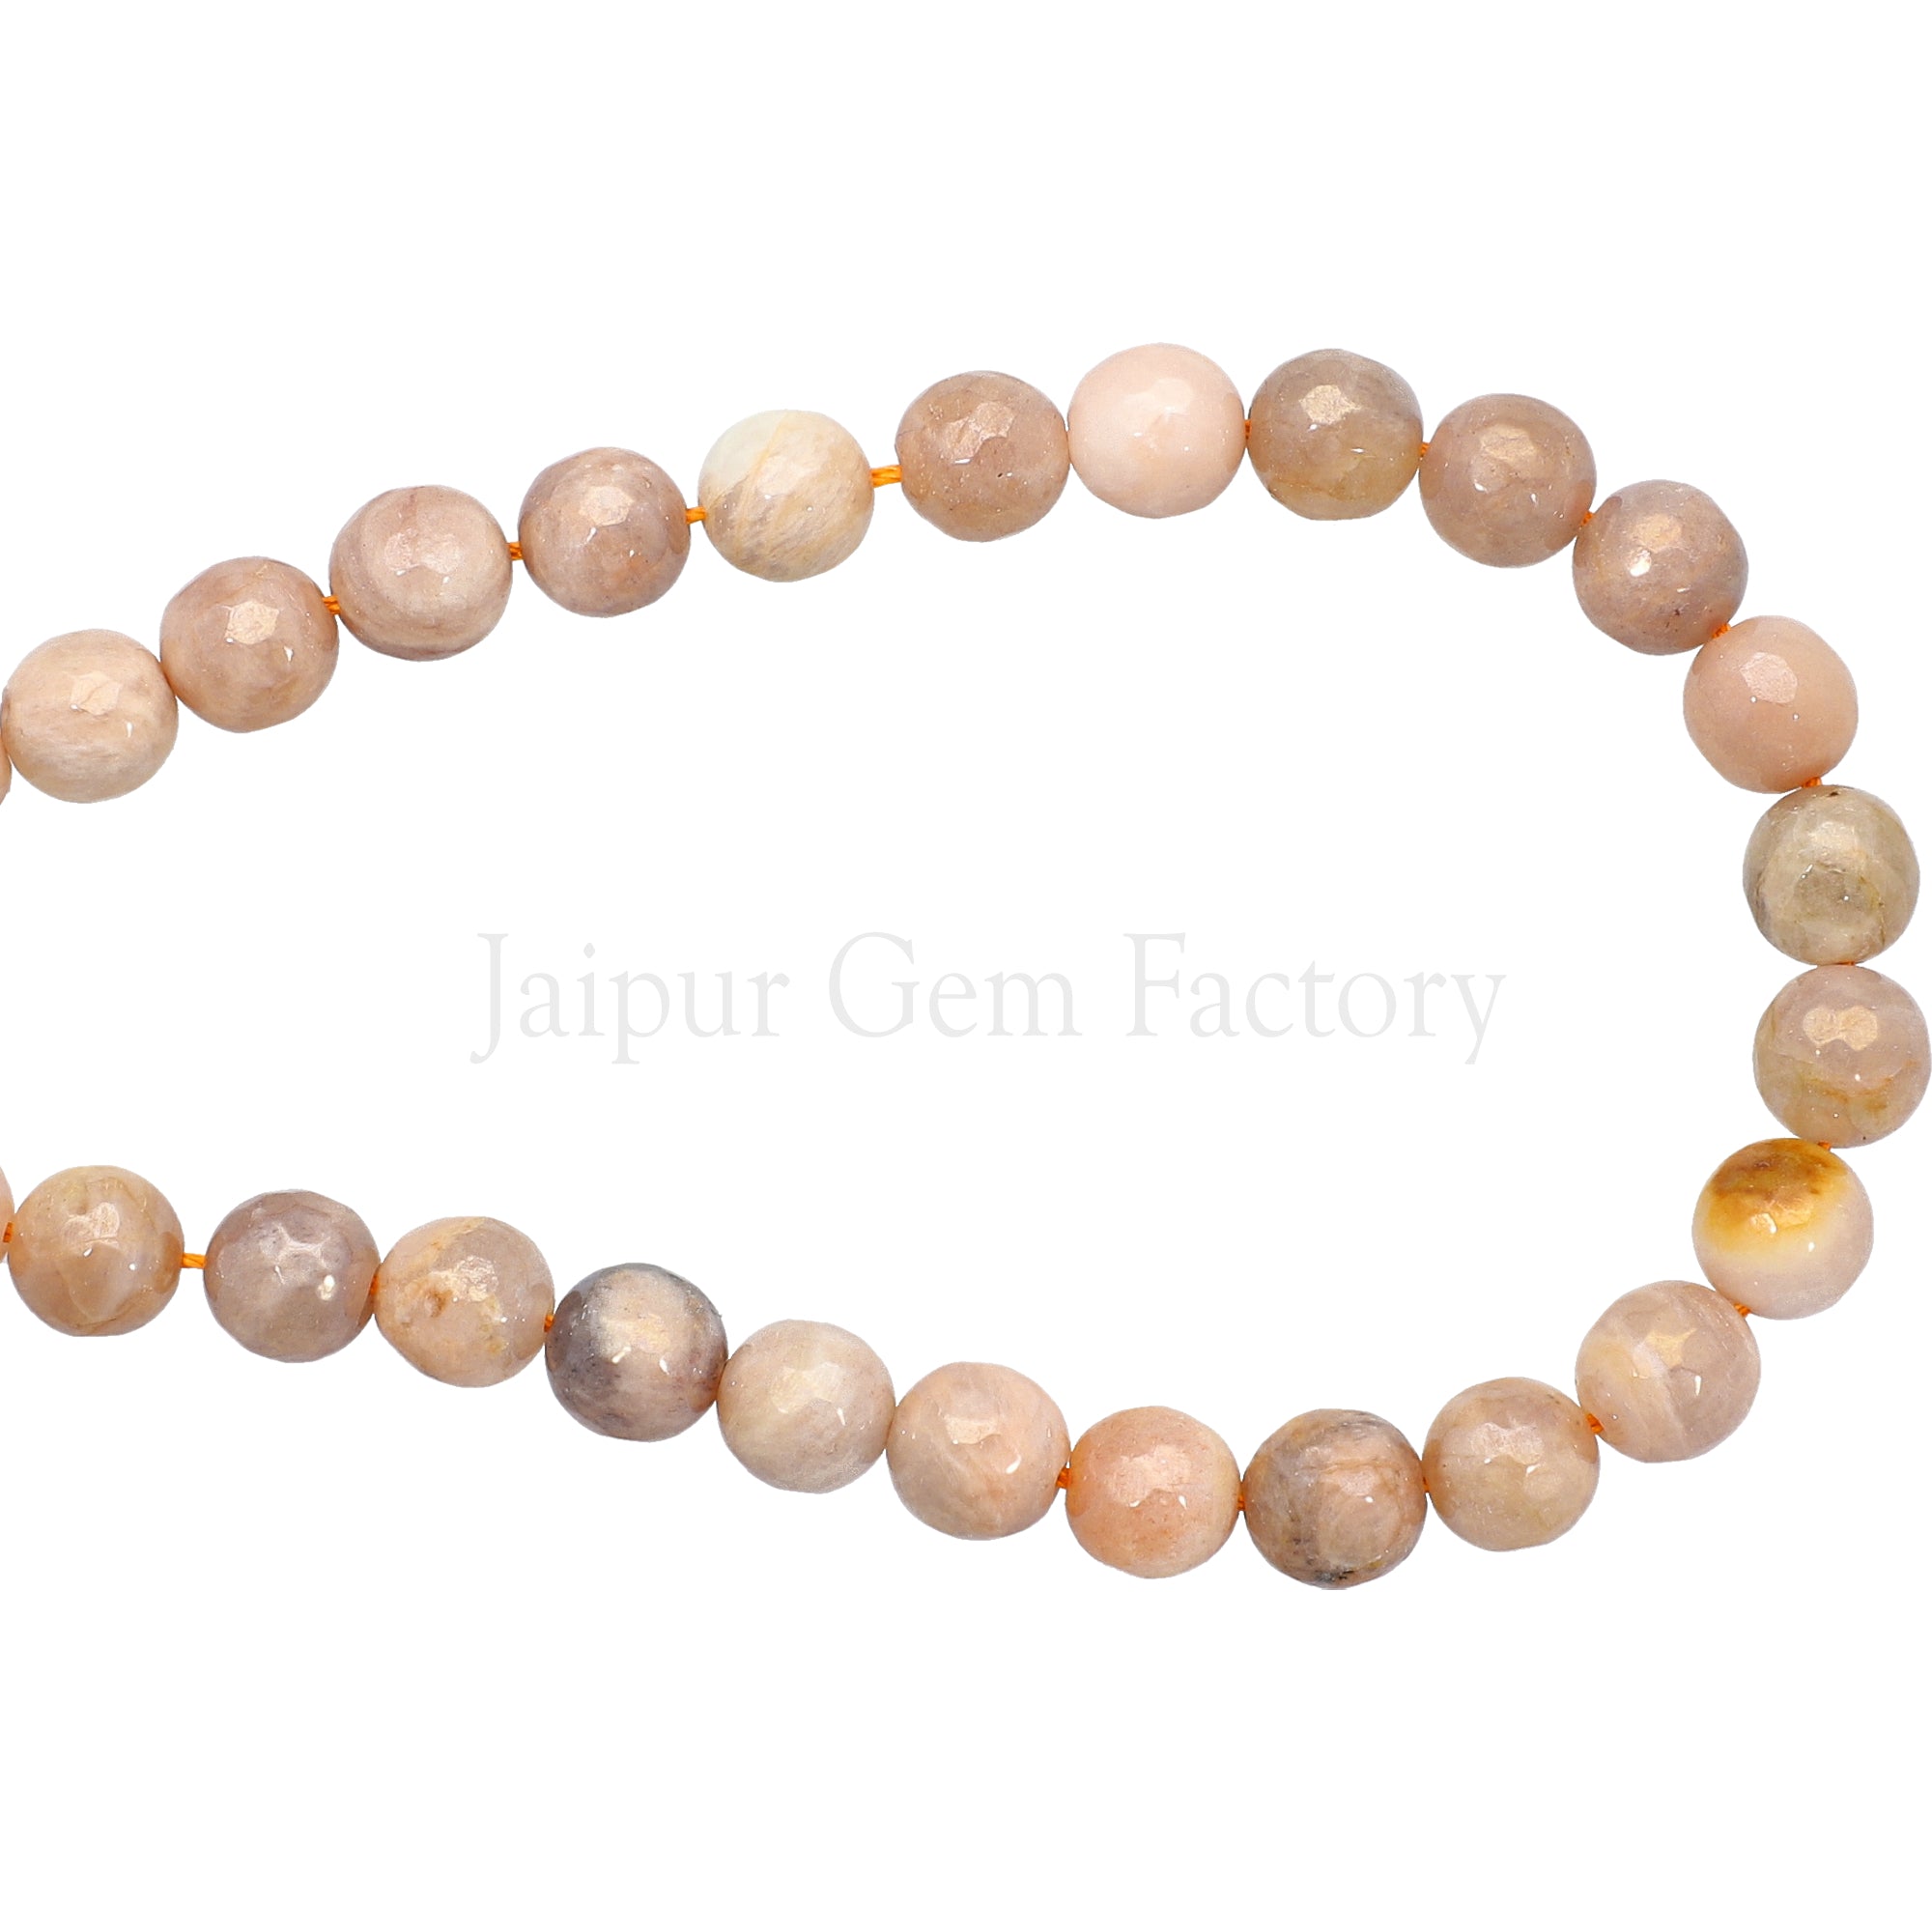 8 MM Mystic Coated Moonstone Faceted Round Beads 15 Inches Strand